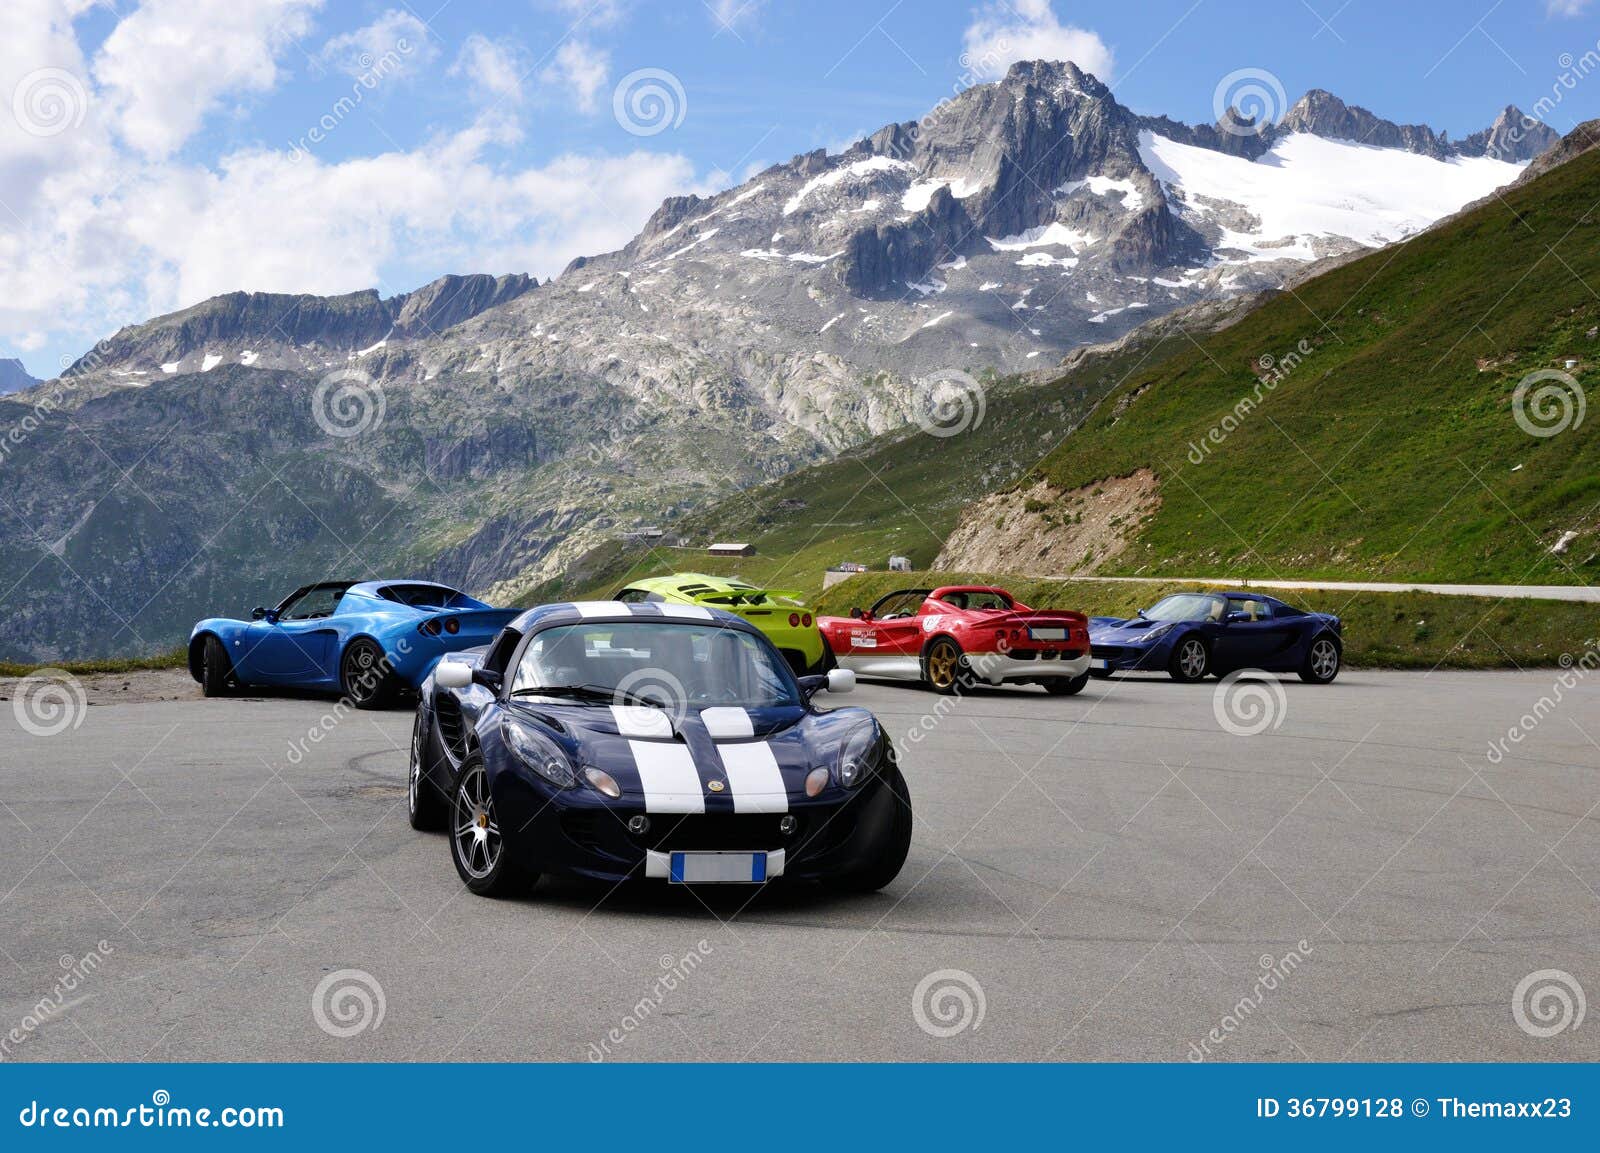 Lotus Elise and Alps landscape. Lotus Elise meeting in Alpine place